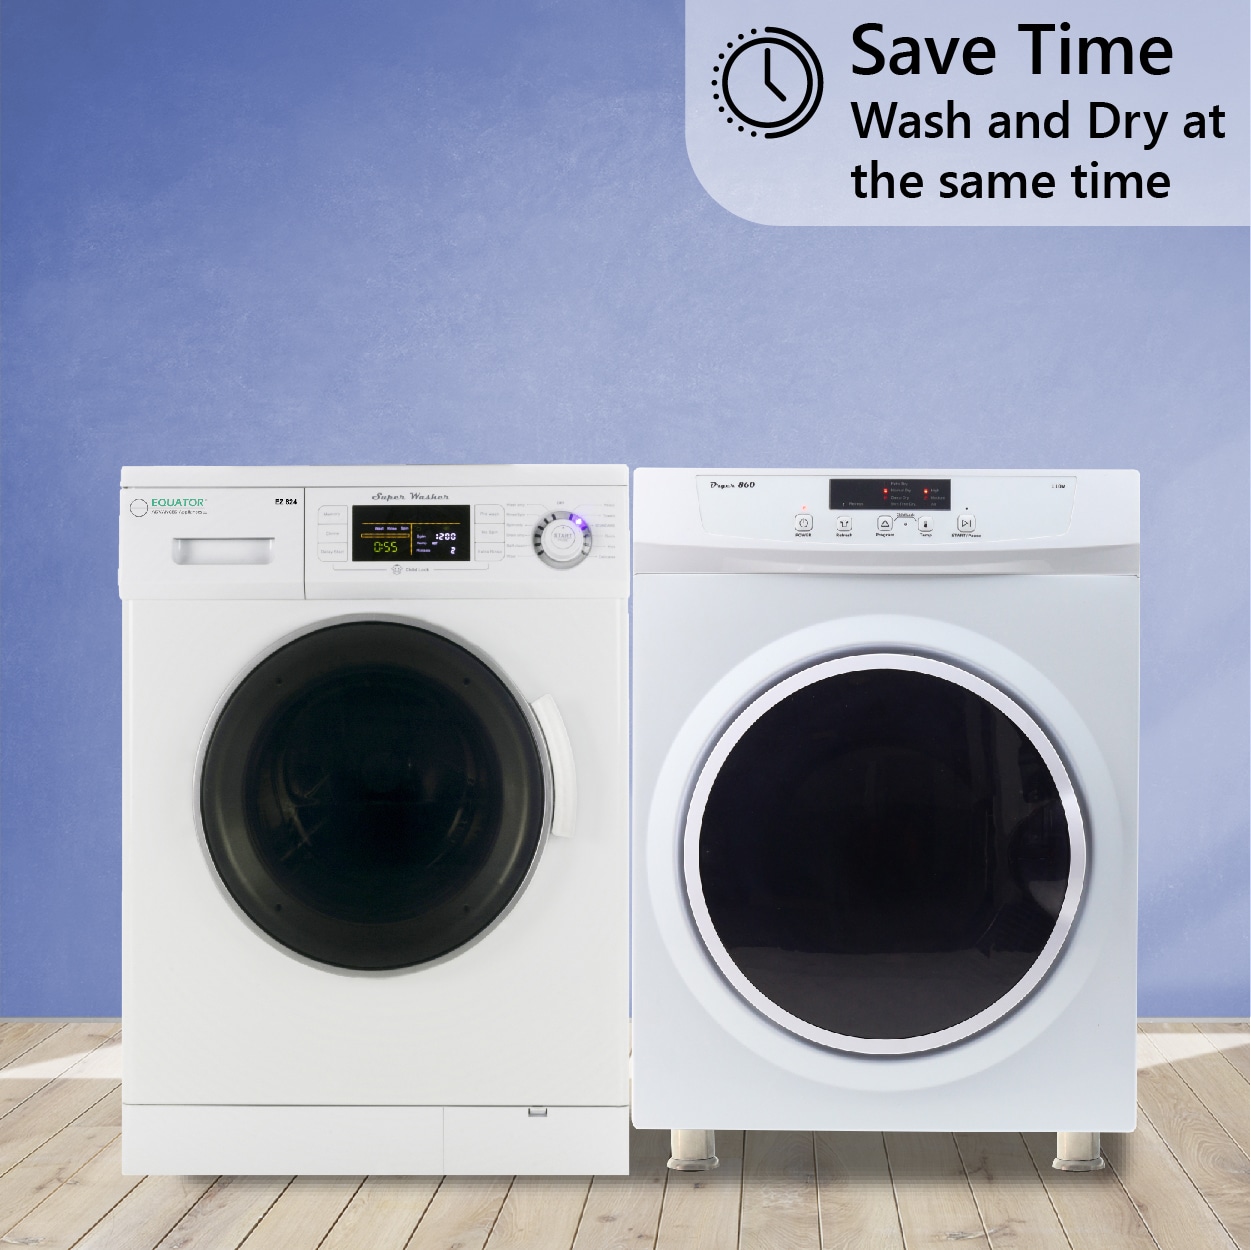 Samsung SAWADREBL23 Side-by-Side on Pedestals Washer & Dryer Set with Front  Load Washer and Electric Dryer in Blue